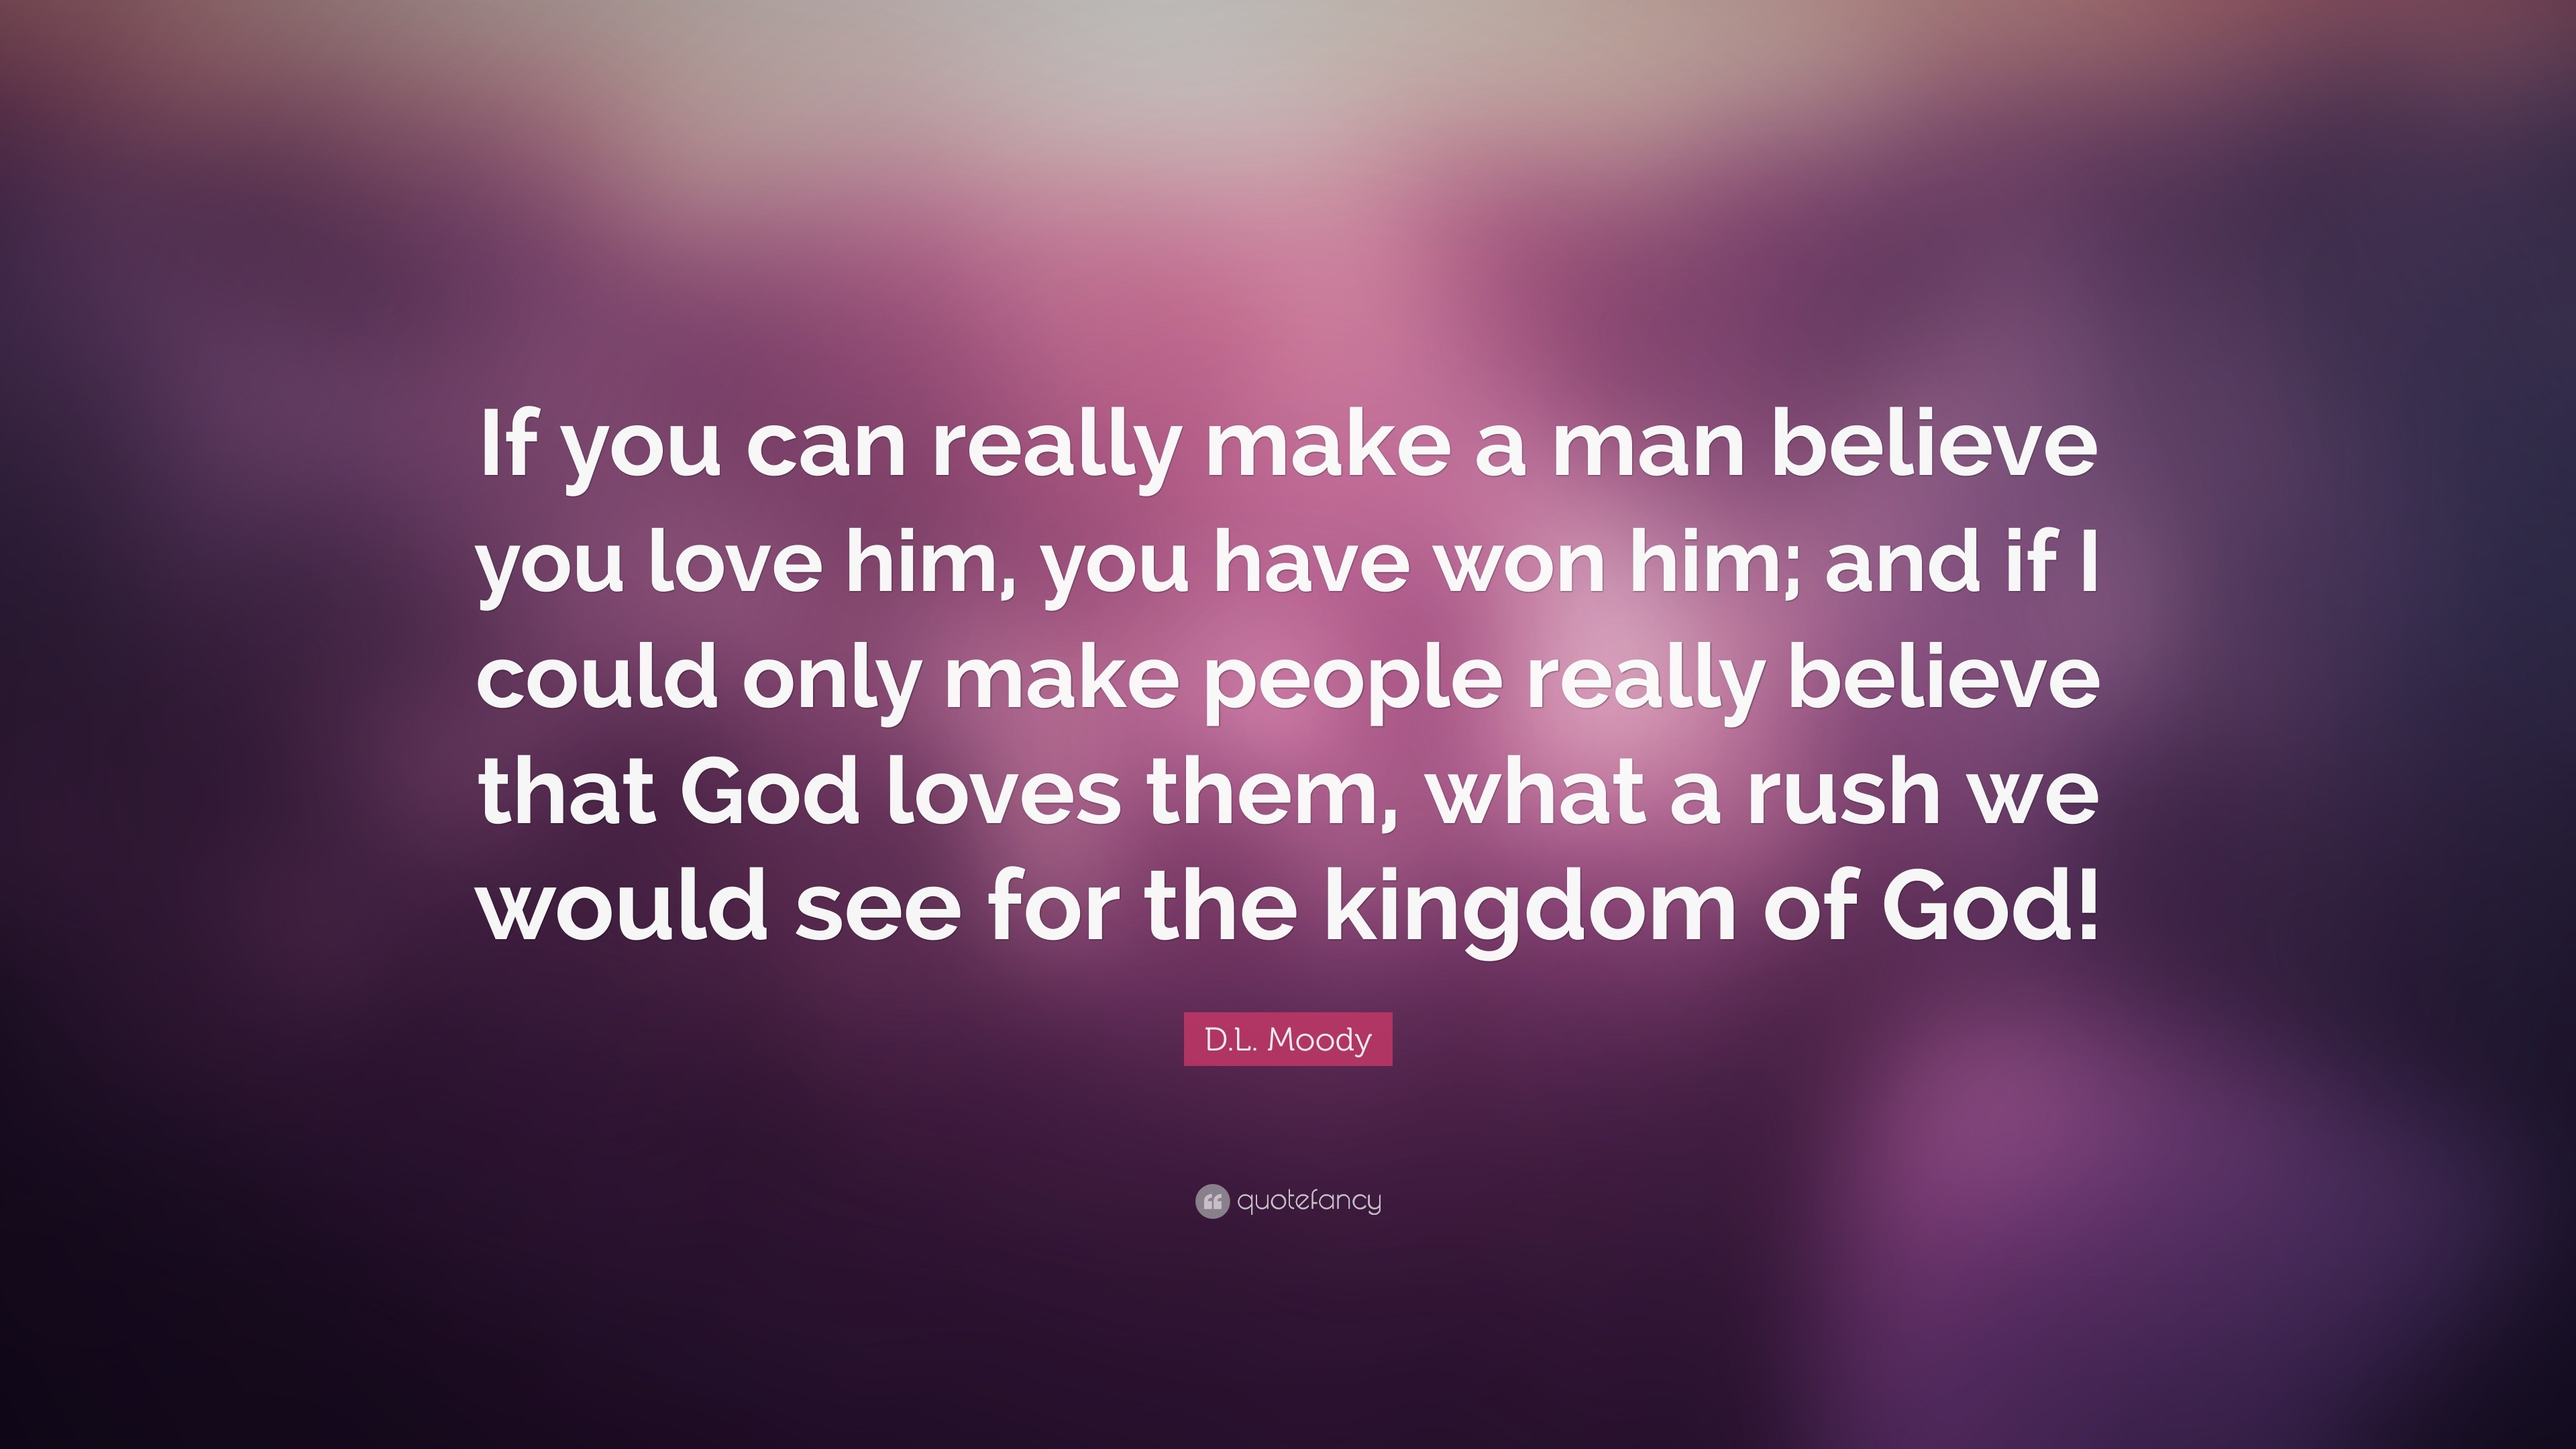 D L Moody Quote “If you can really make a man believe you love him